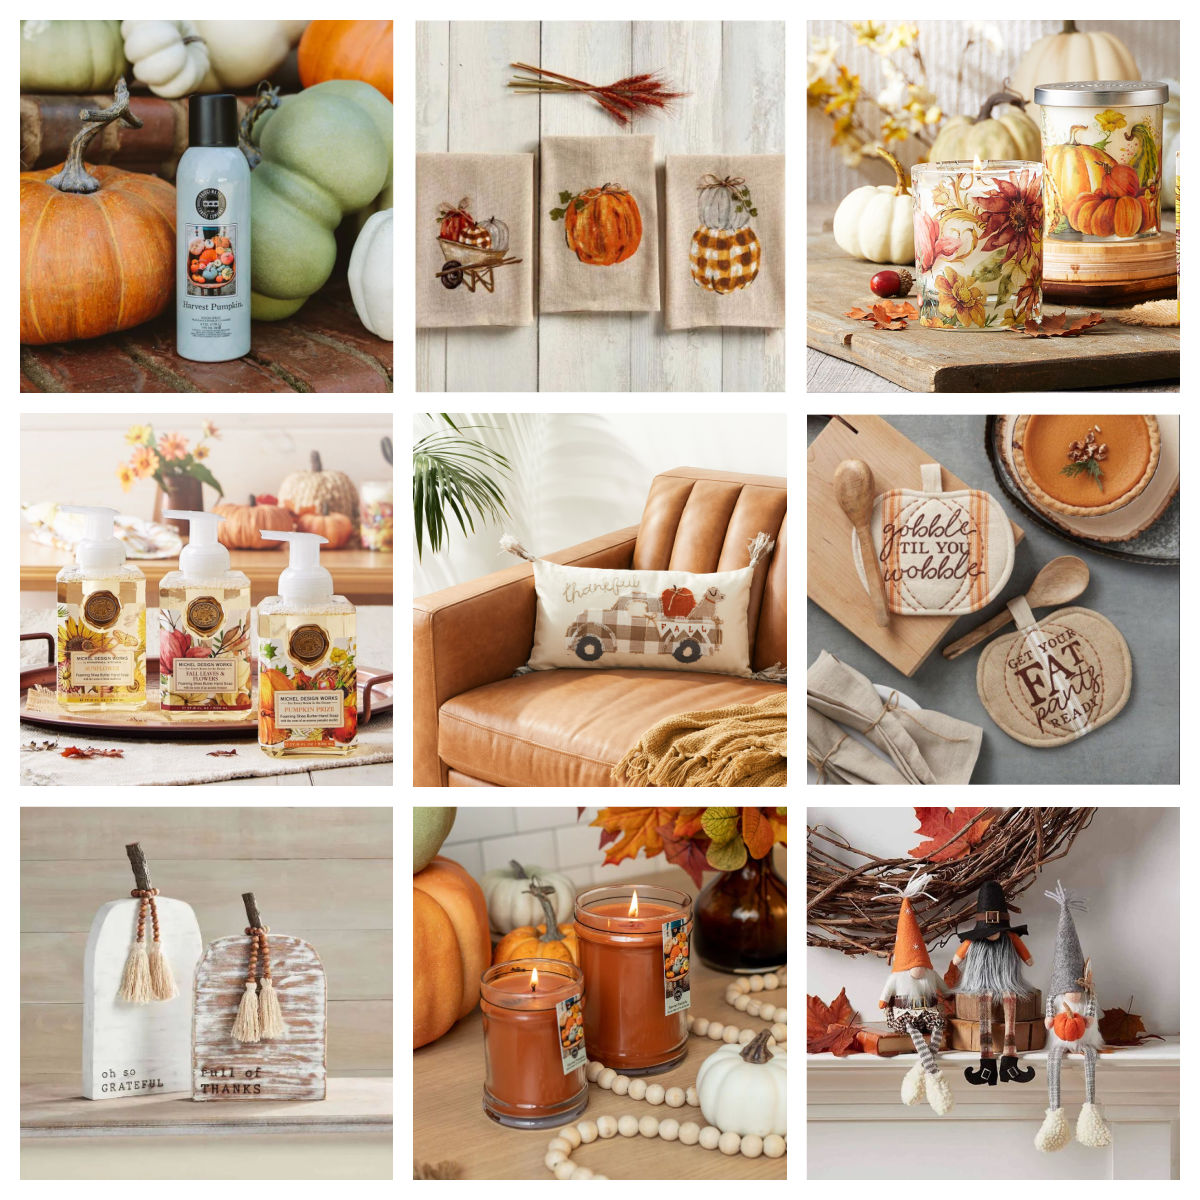 Welcoming Fall with some of our favorites!